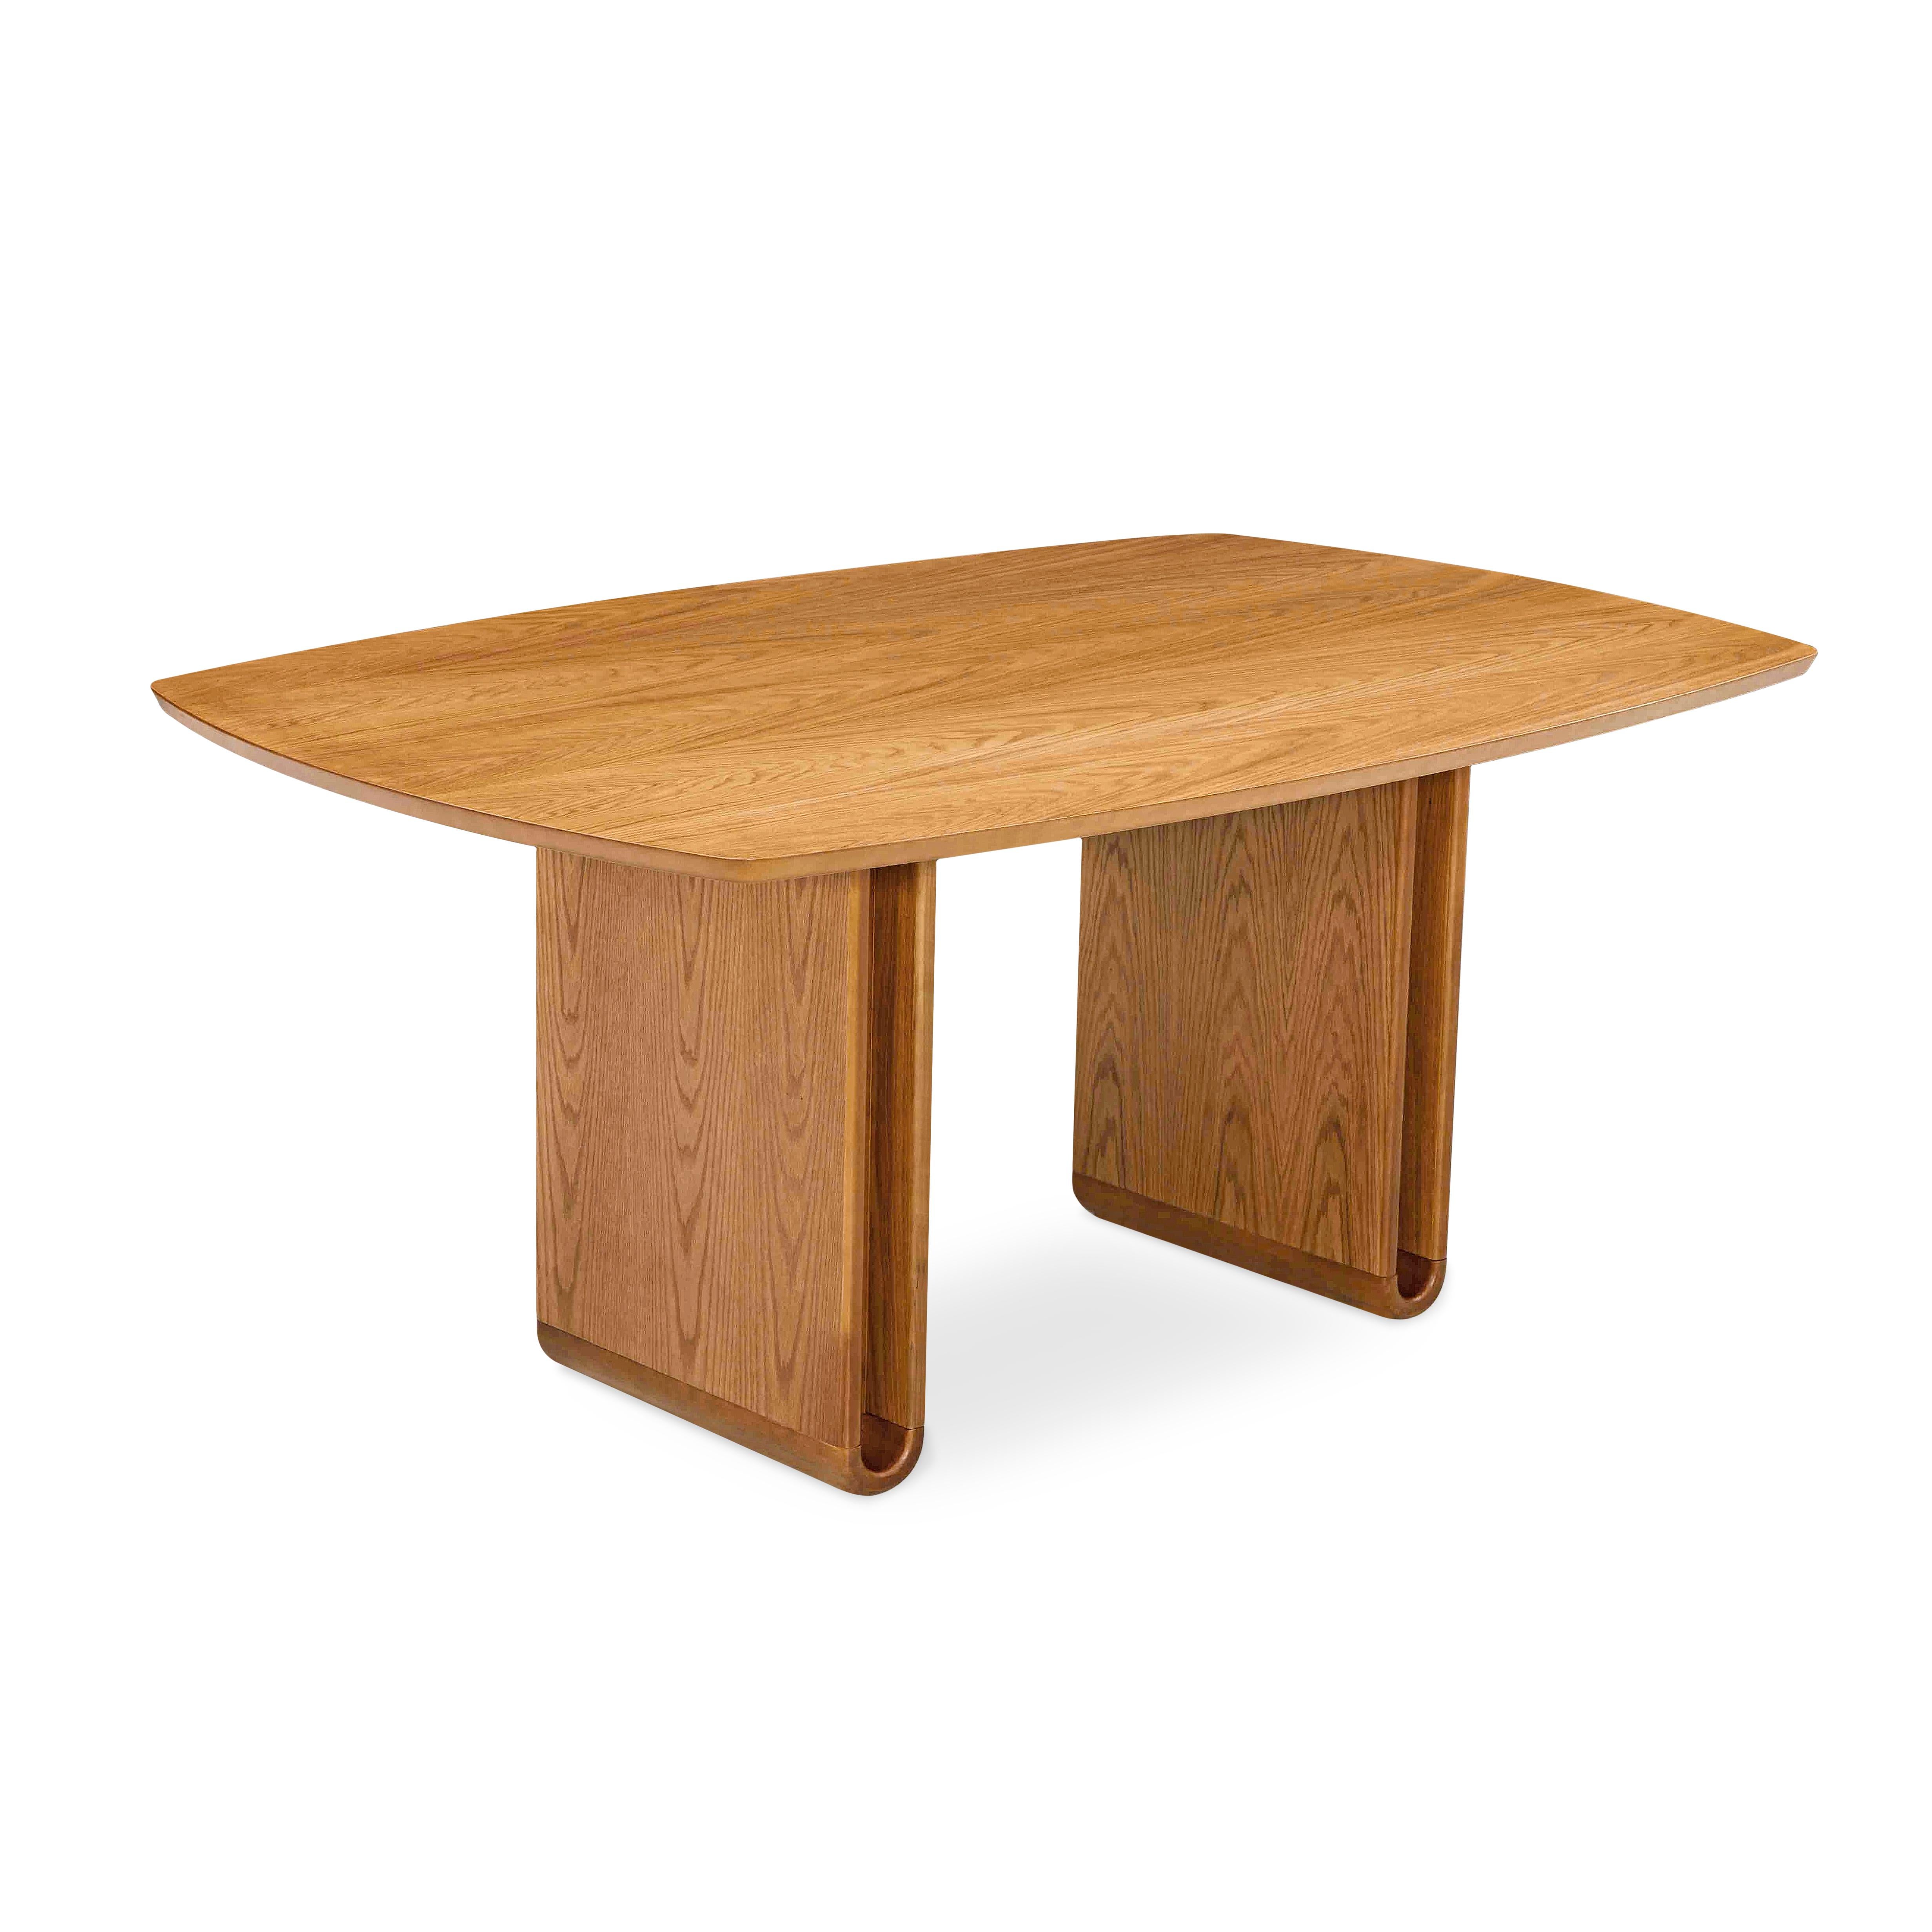 Contemporary Neon Dining Table in Almond Oak Wood Finish 68'' For Sale